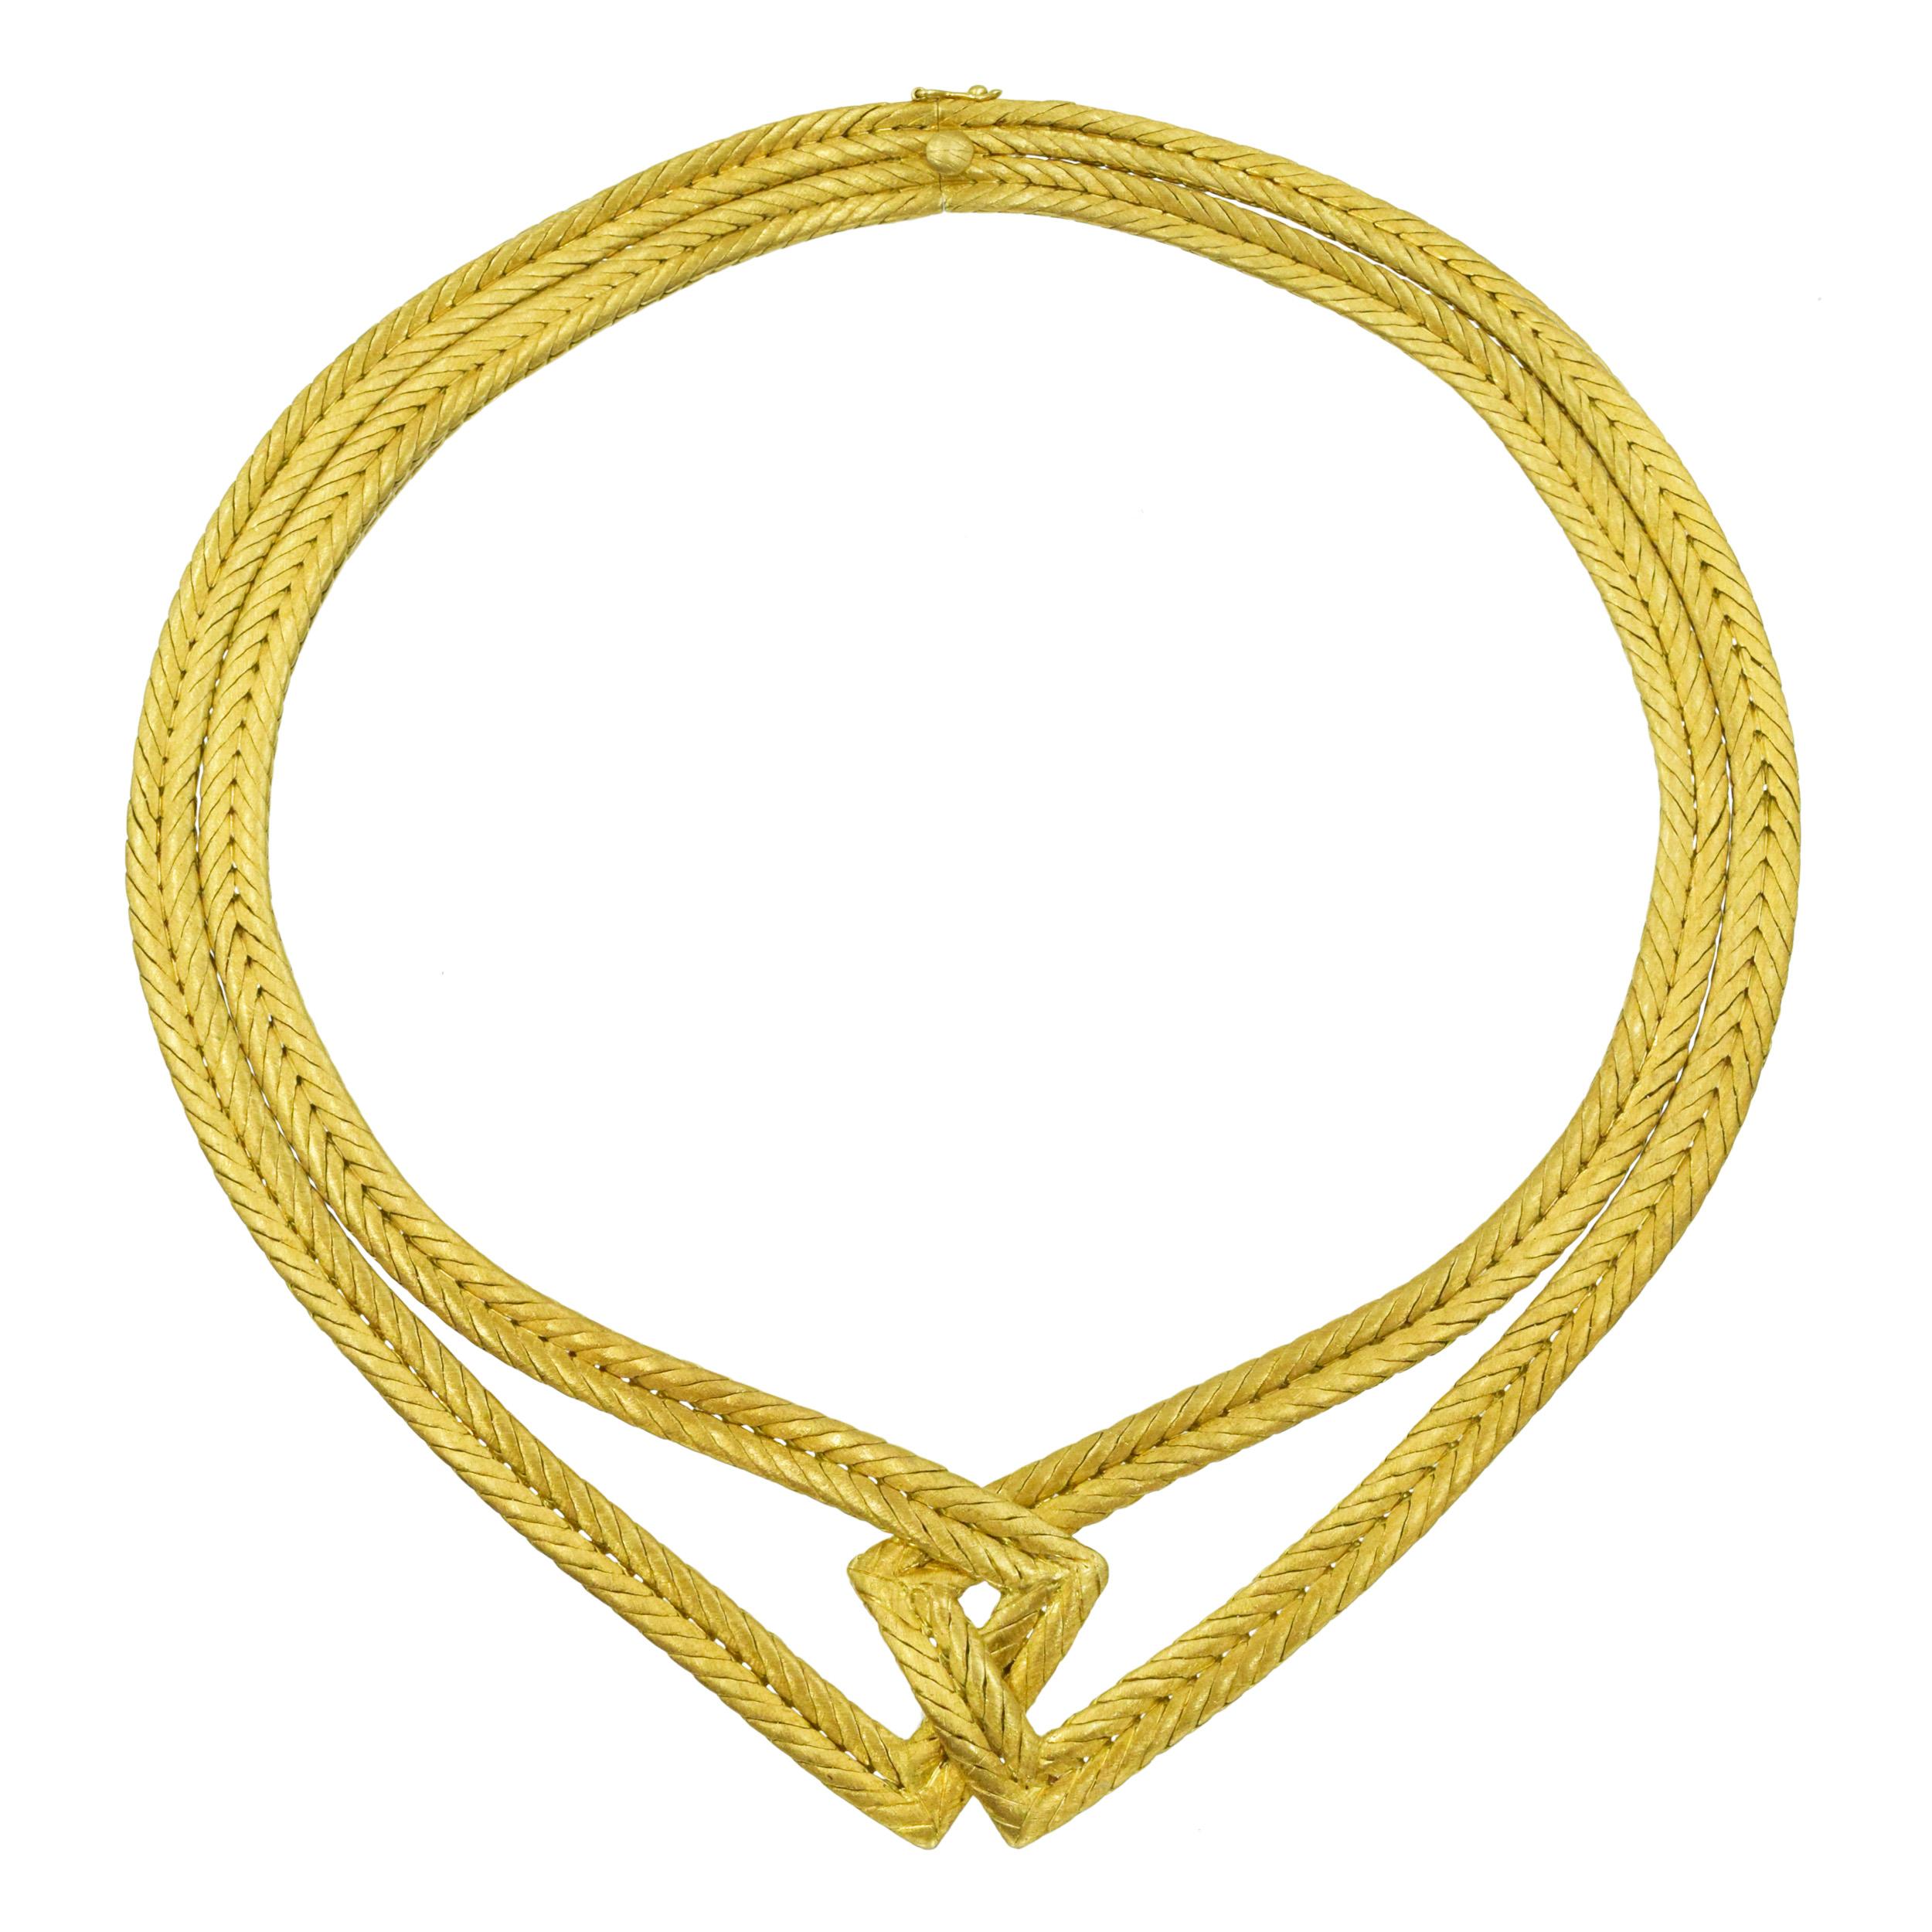 Buccellati woven choker necklace in 18k yellow gold. The necklace consists of two woven design strands interlocked at the center. Featuring iconic Buccellati brushed gold finish. Equipped with box clasp and fold over safety lock. Inscribed: